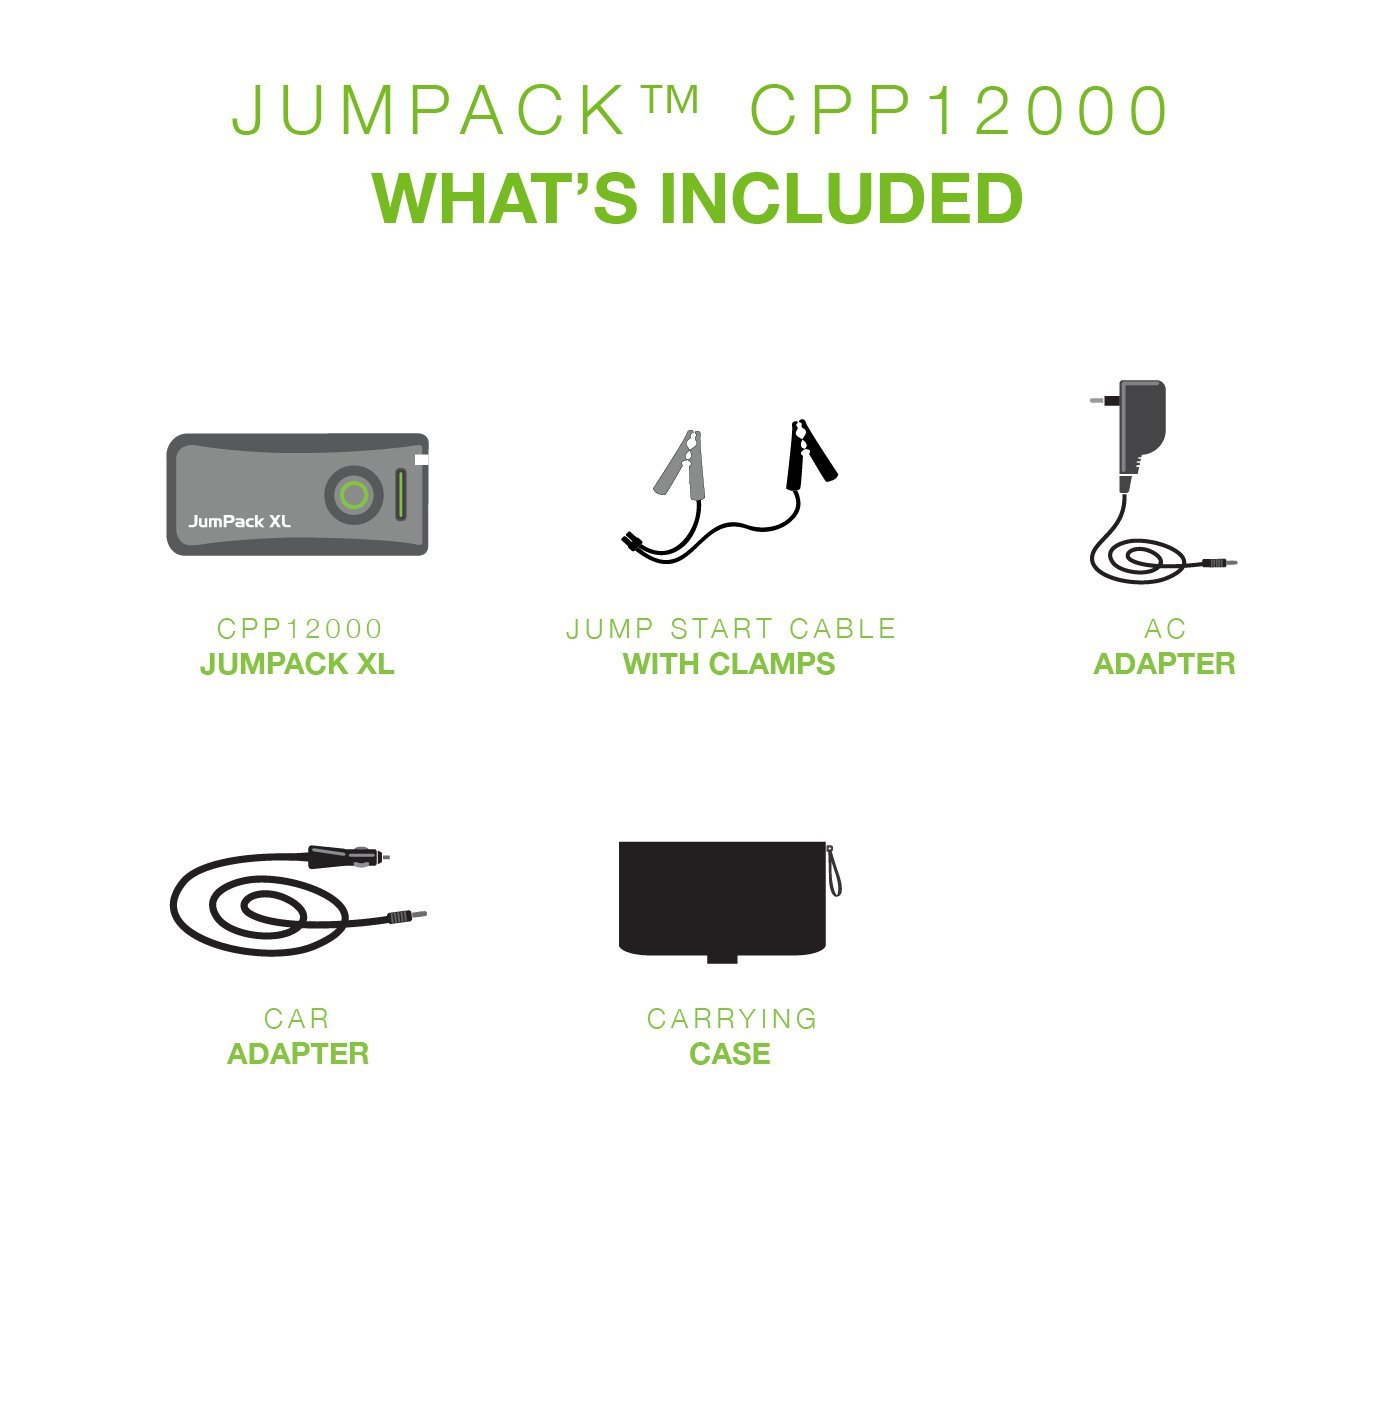 Cobra JumPack XL CPP 12000 - Emergency charger + AC power adapter - LiCoO2 - 11100 mAh - 500 A - 2 output connectors (USB, 2-pole) - gray - image 5 of 8